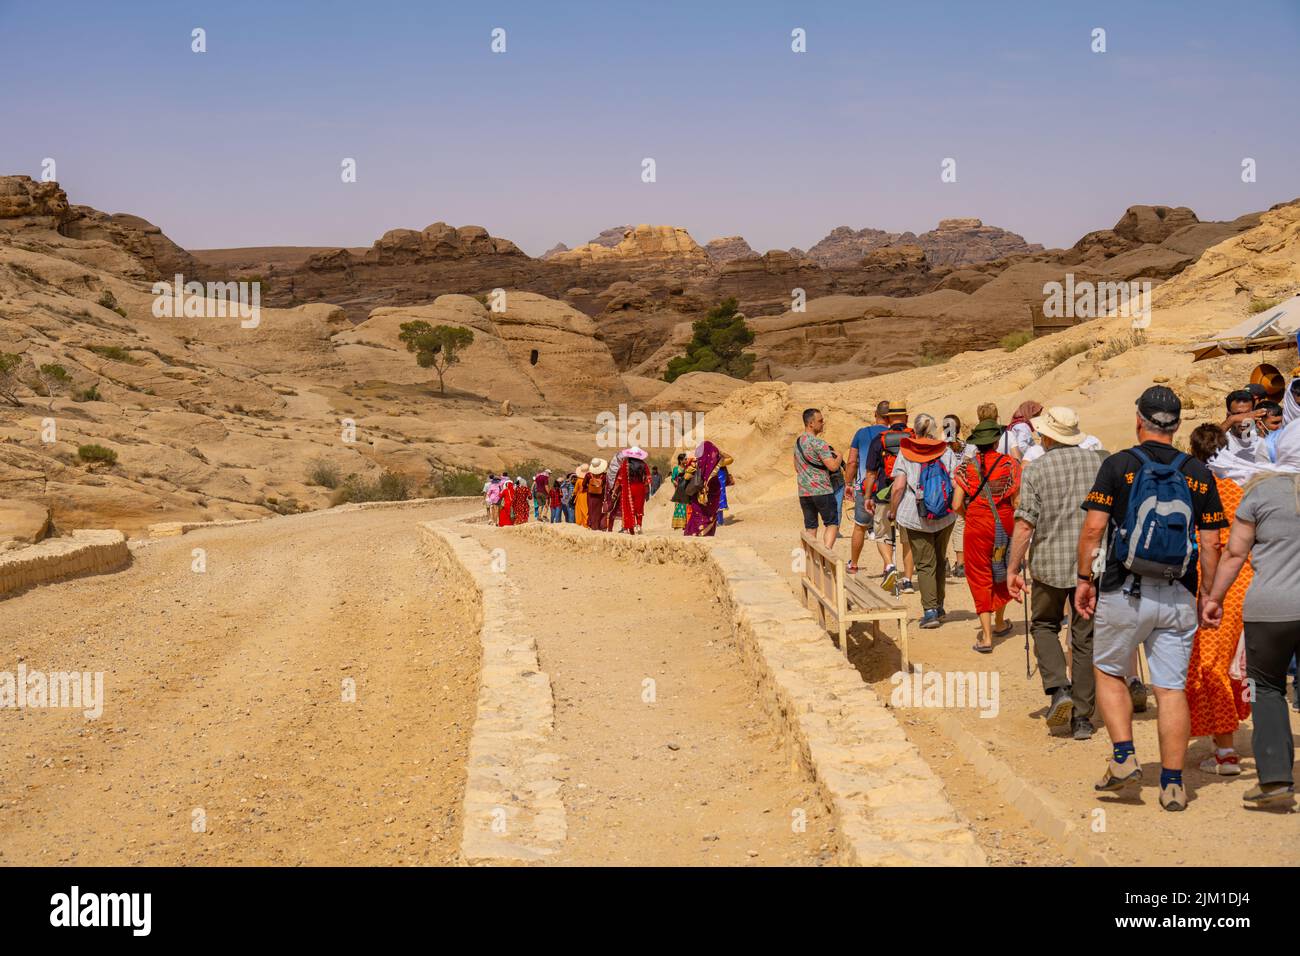 Crowds of people walking down the entrance road to Al-Siq and Petra in Wadi Musa Jordan Stock Photo